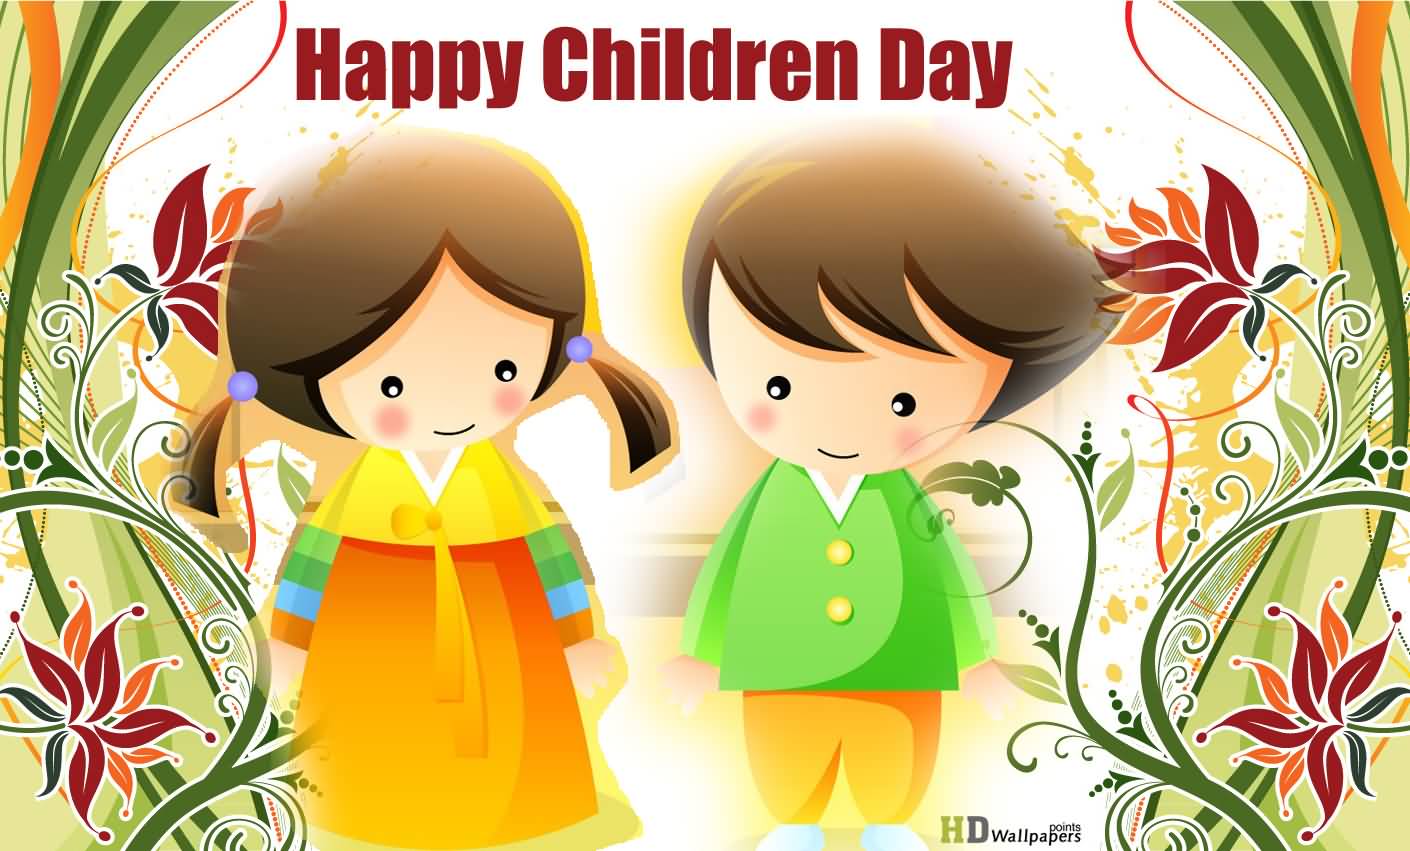 Happy Children's Day Greeting Card Picture